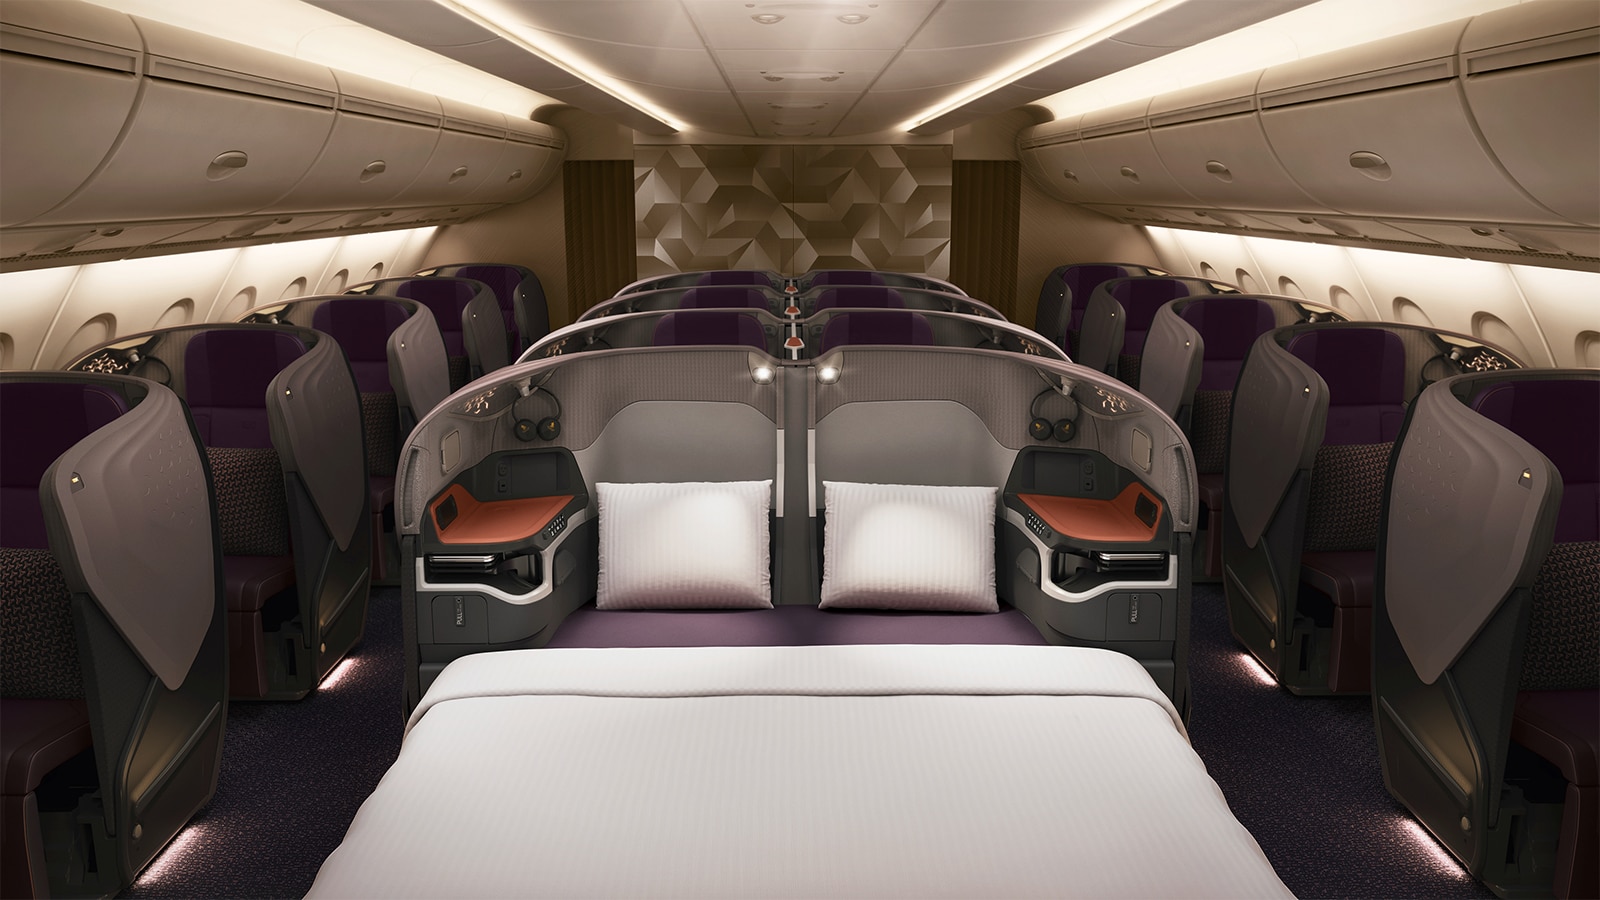 Who Has The Best Business-Class Cabin? | The Journal | MR PORTER